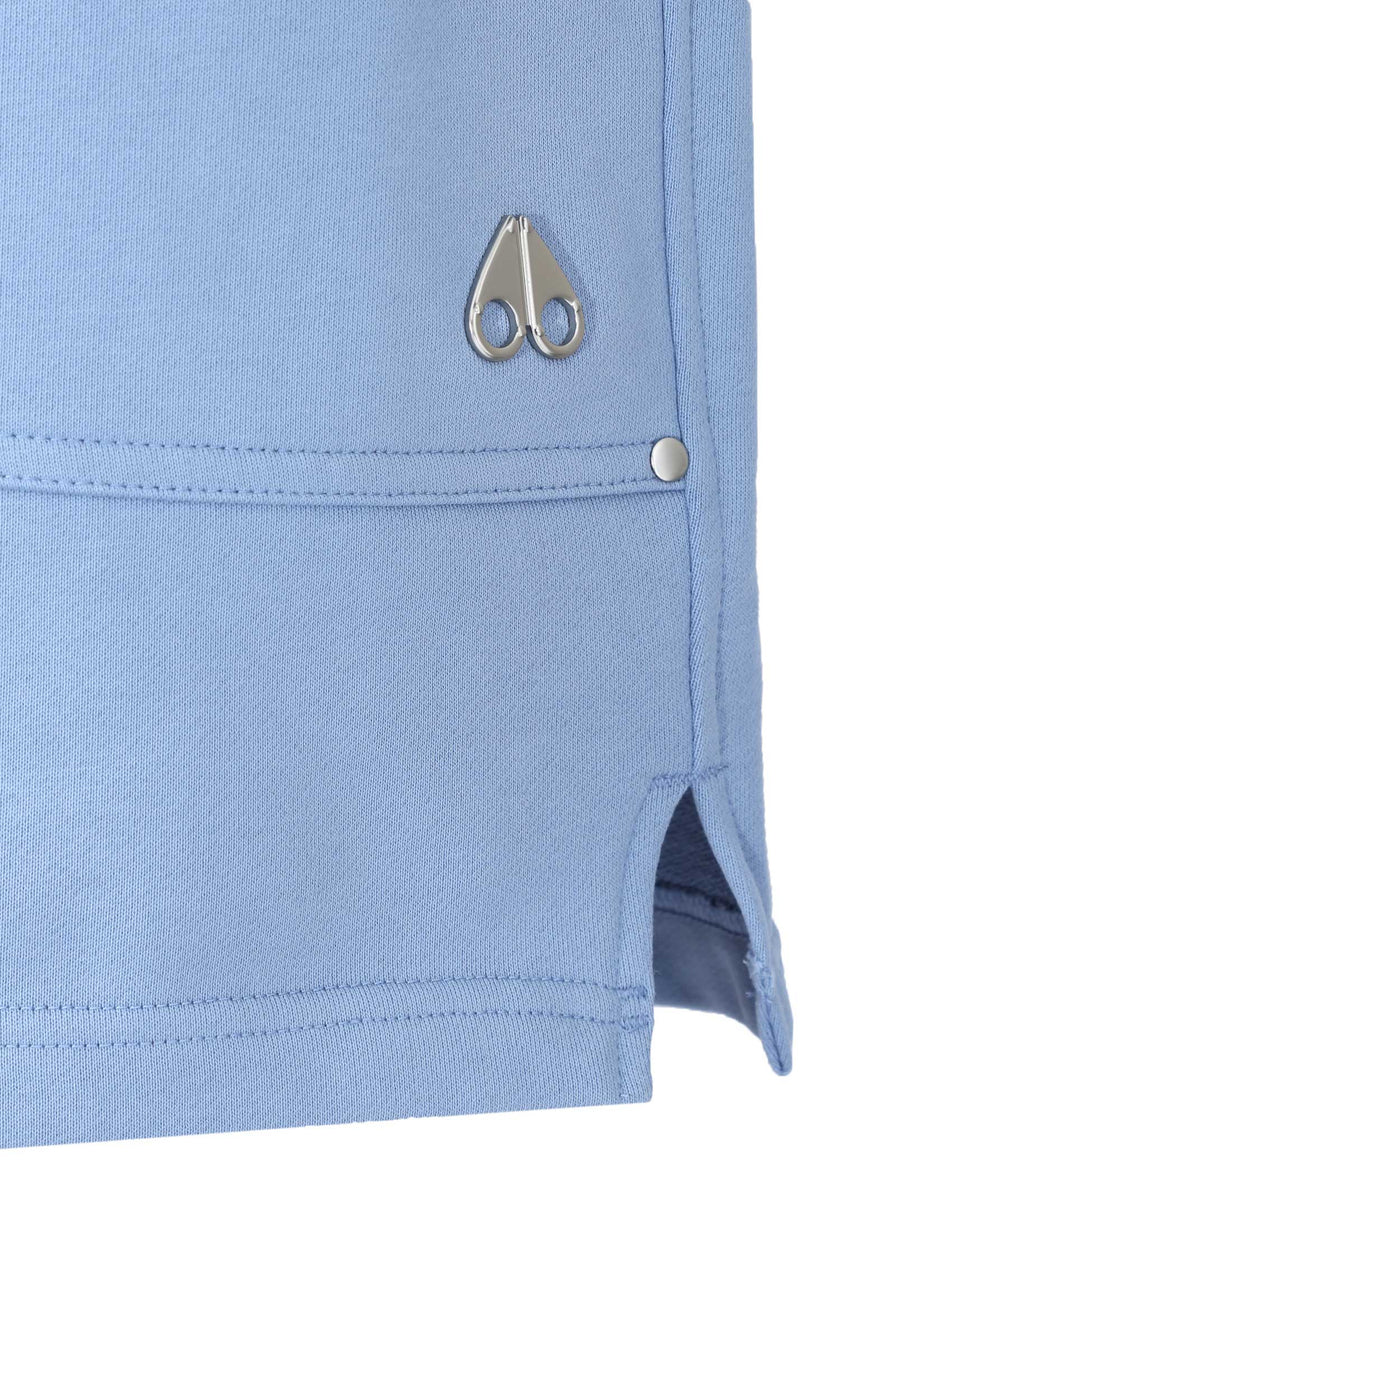 Moose Knuckles Gifford Shorts Sweat Short in Windy Blue